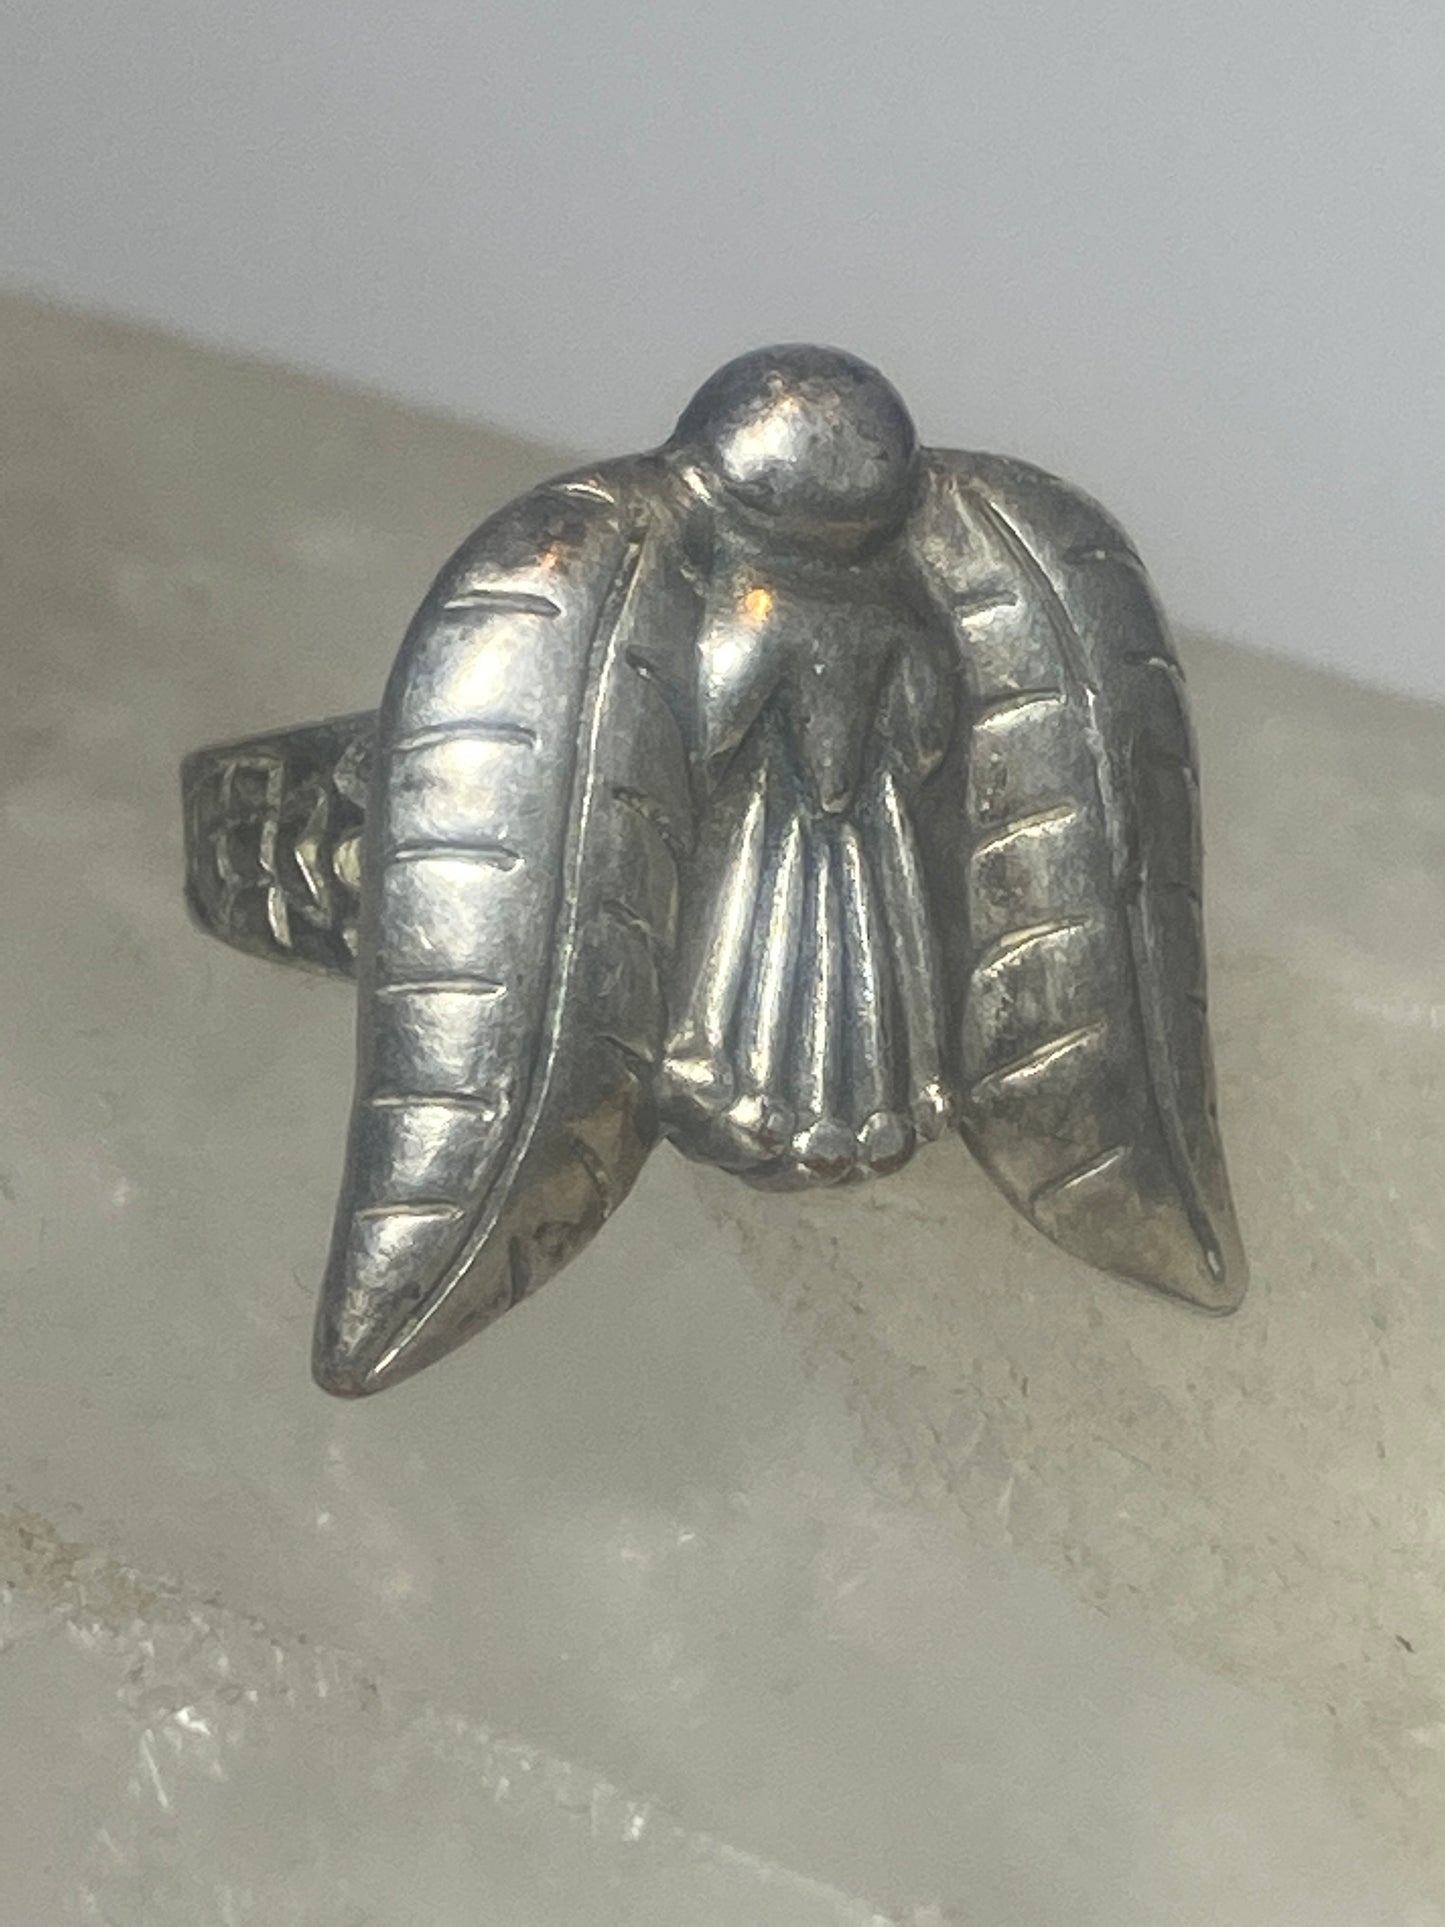 Angel ring size 5.75 southwest feather band sterling silver women